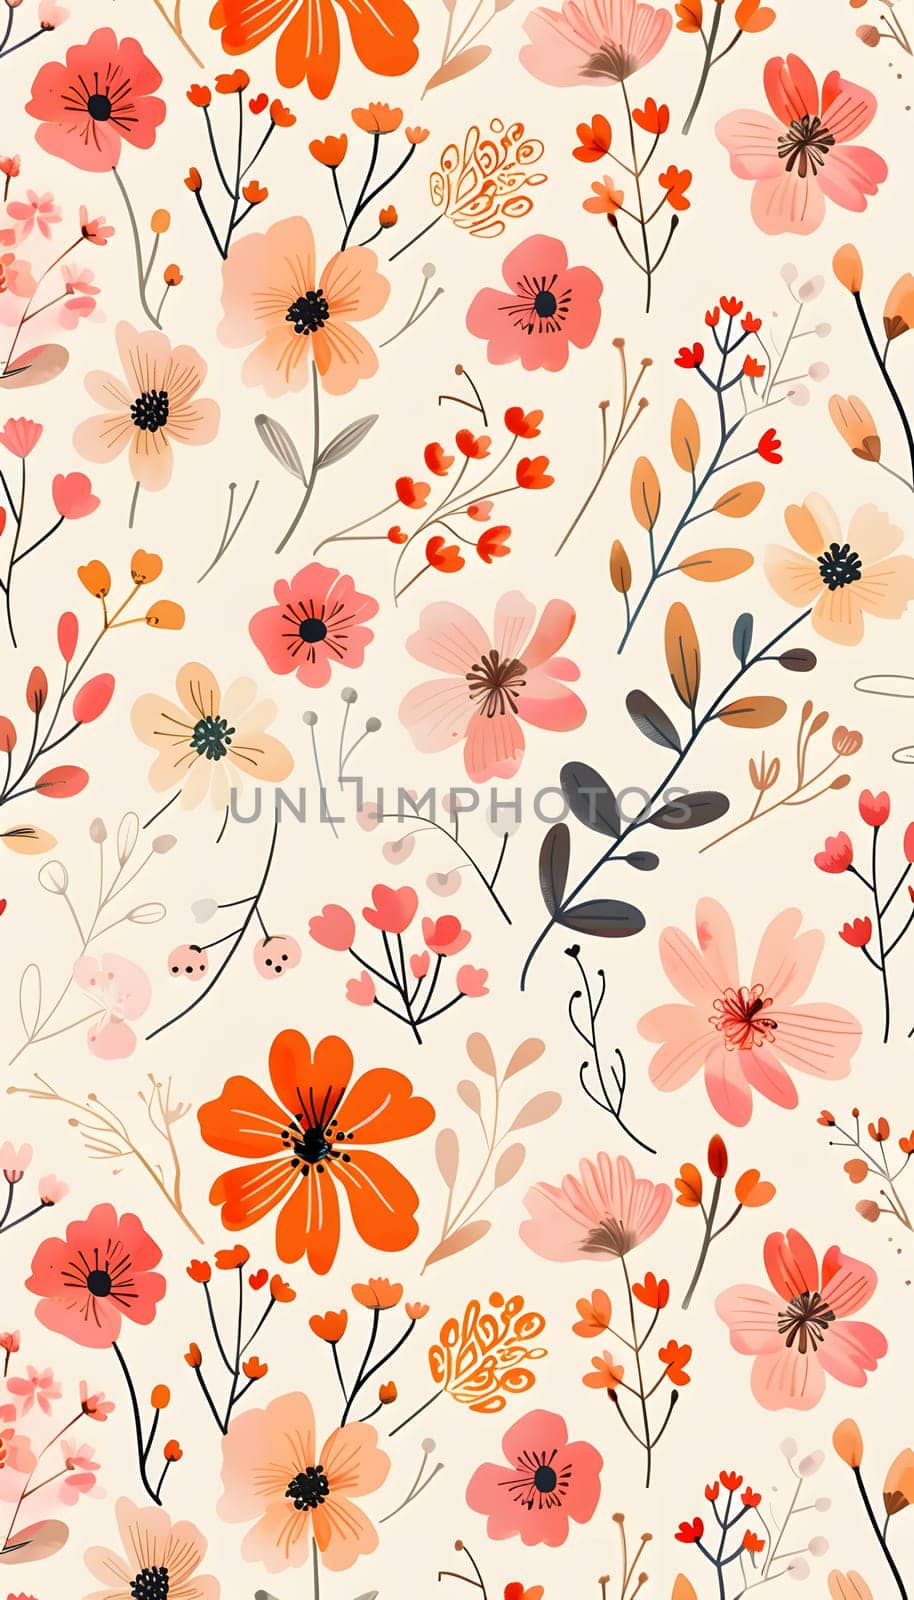 Creative arts A motif of pink and orange flowers on a white textile background by Nadtochiy